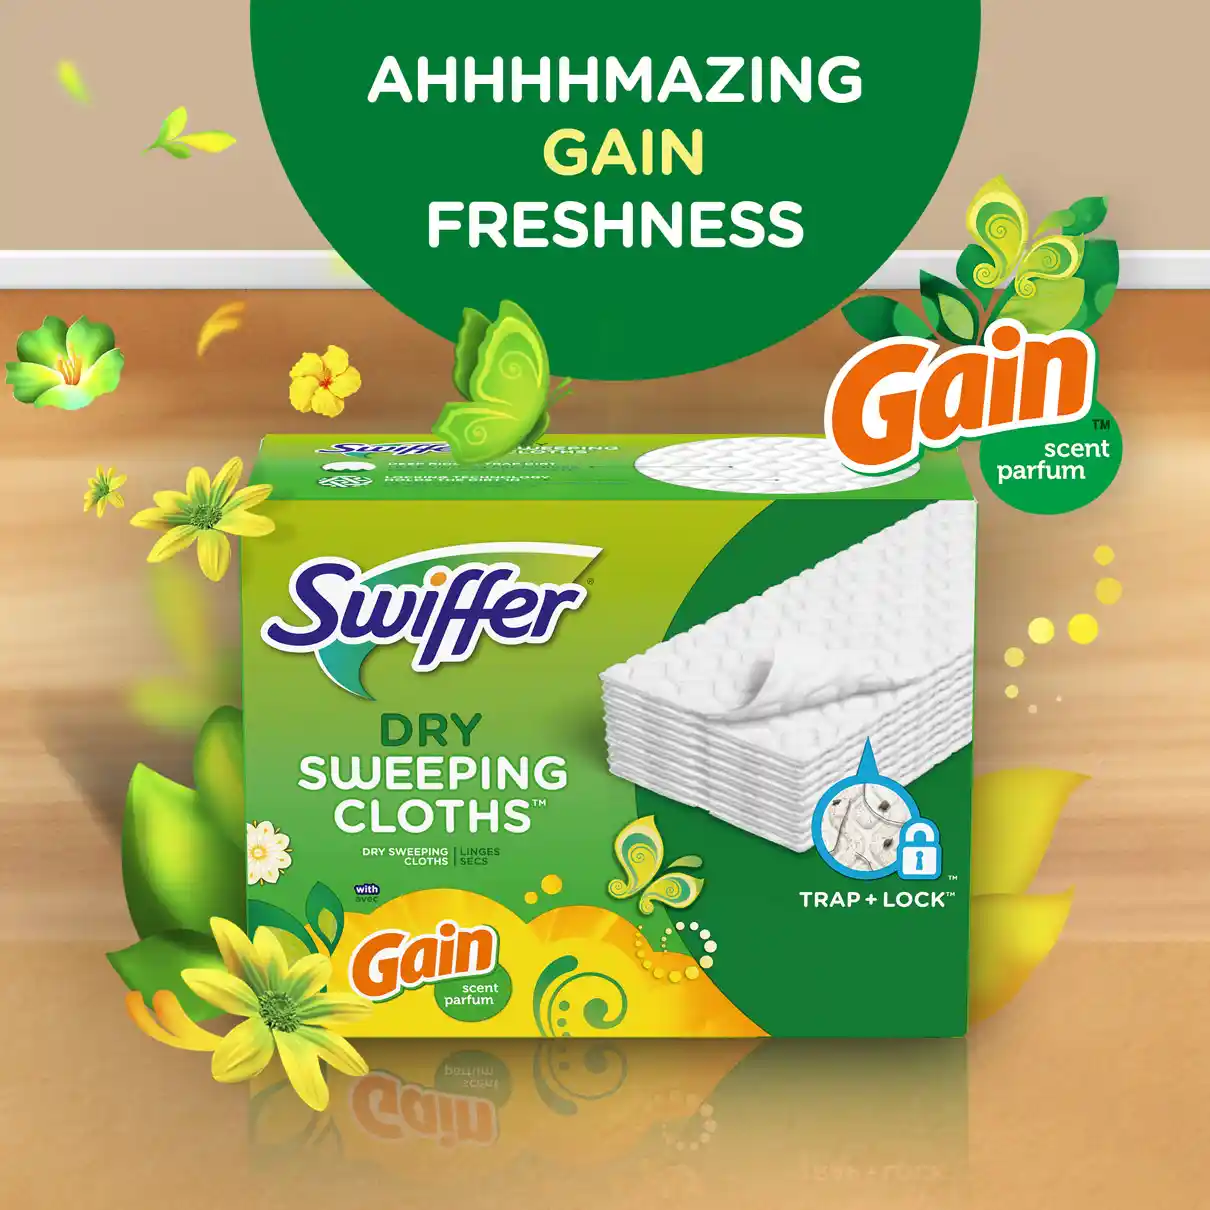 Sweeper Dry Refills - Gain Scent